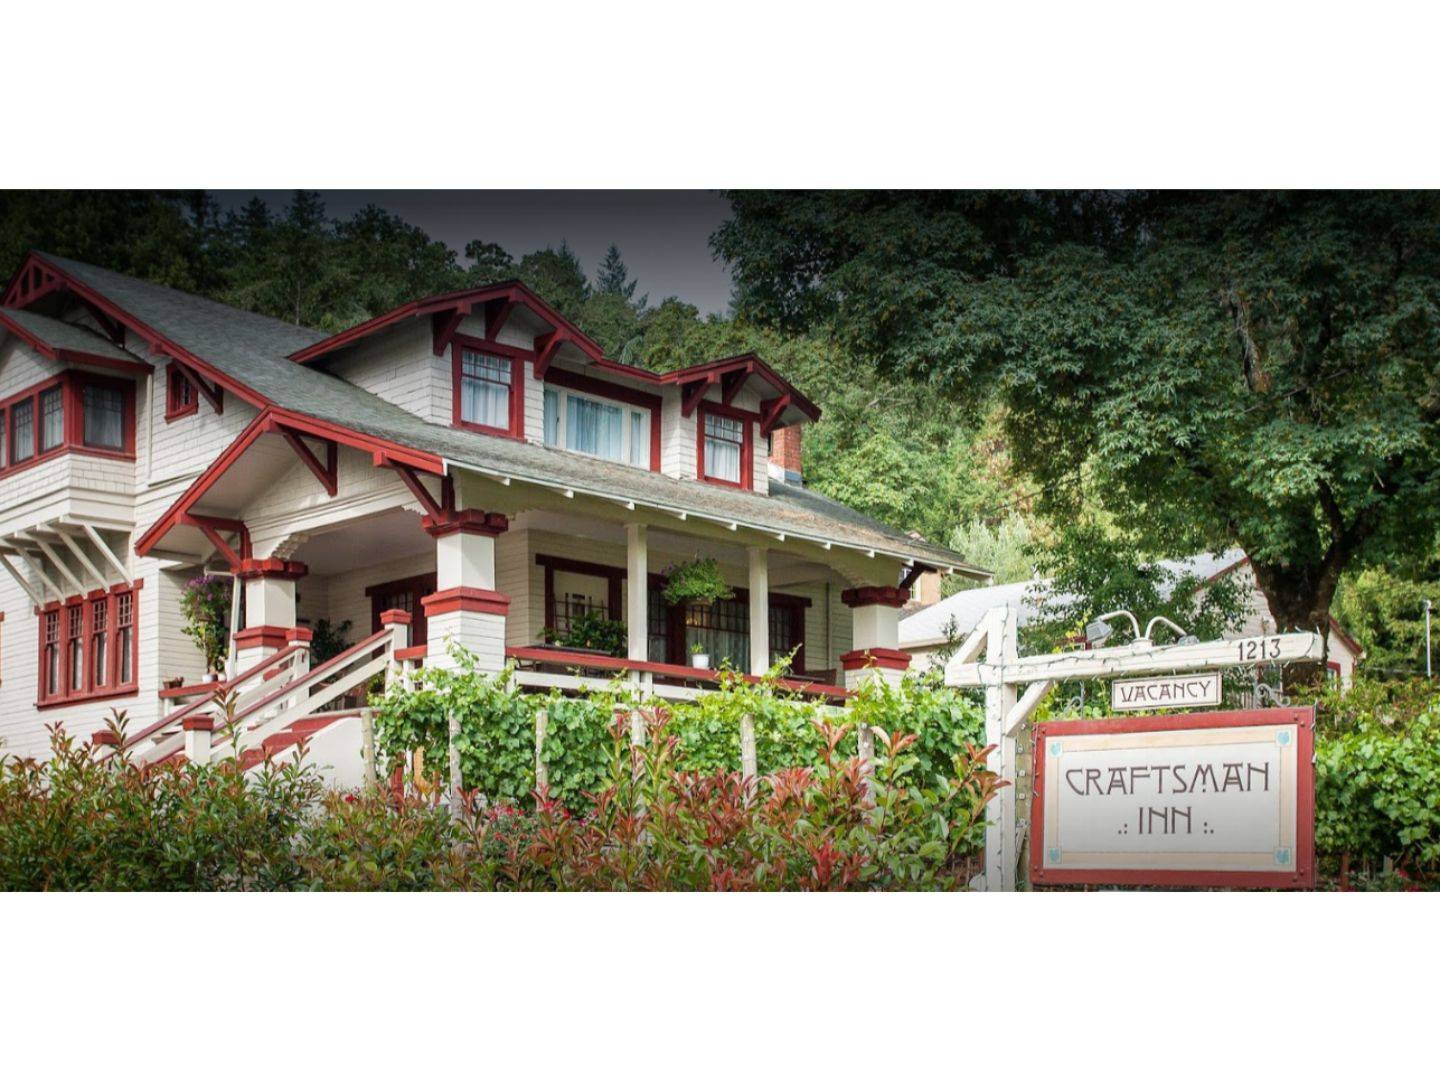 Calistoga Bed and Breakfast